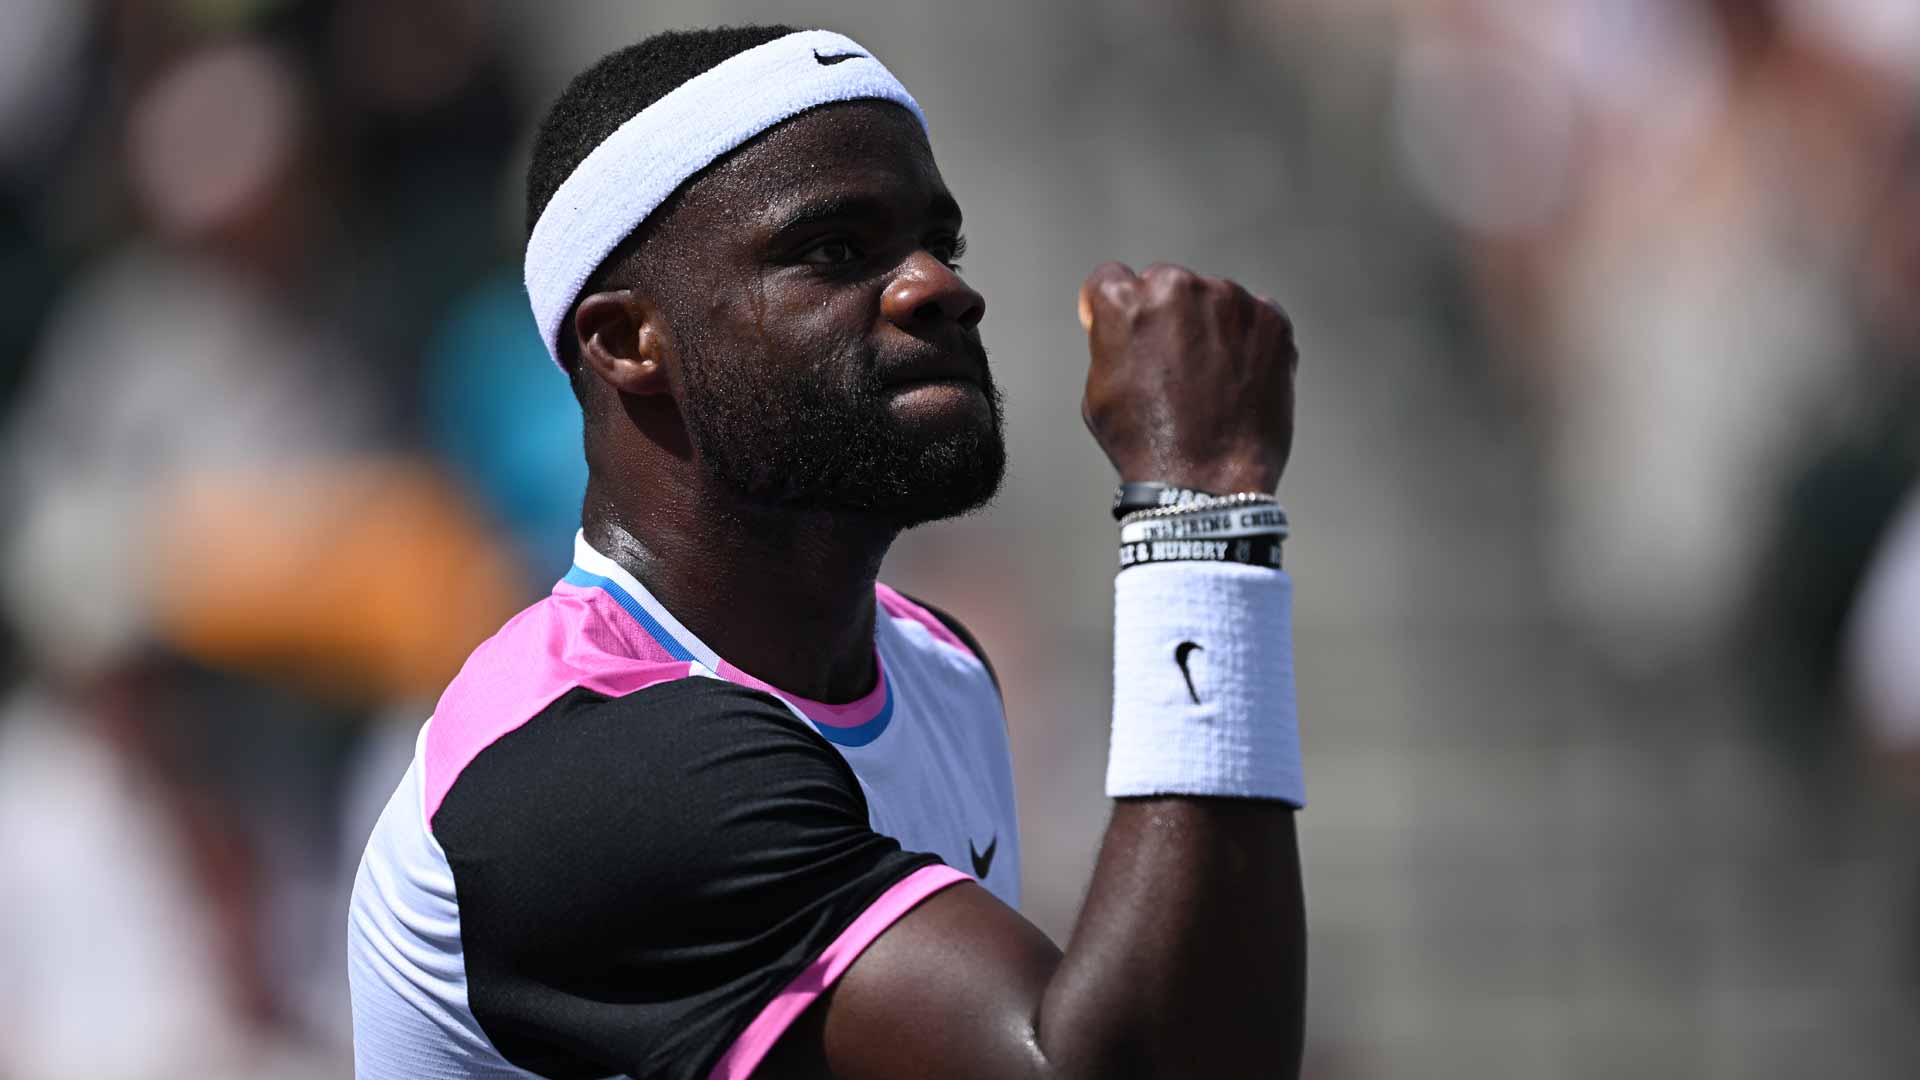 Frances Tiafoe is No. 21 in the PIF ATP Rankings.